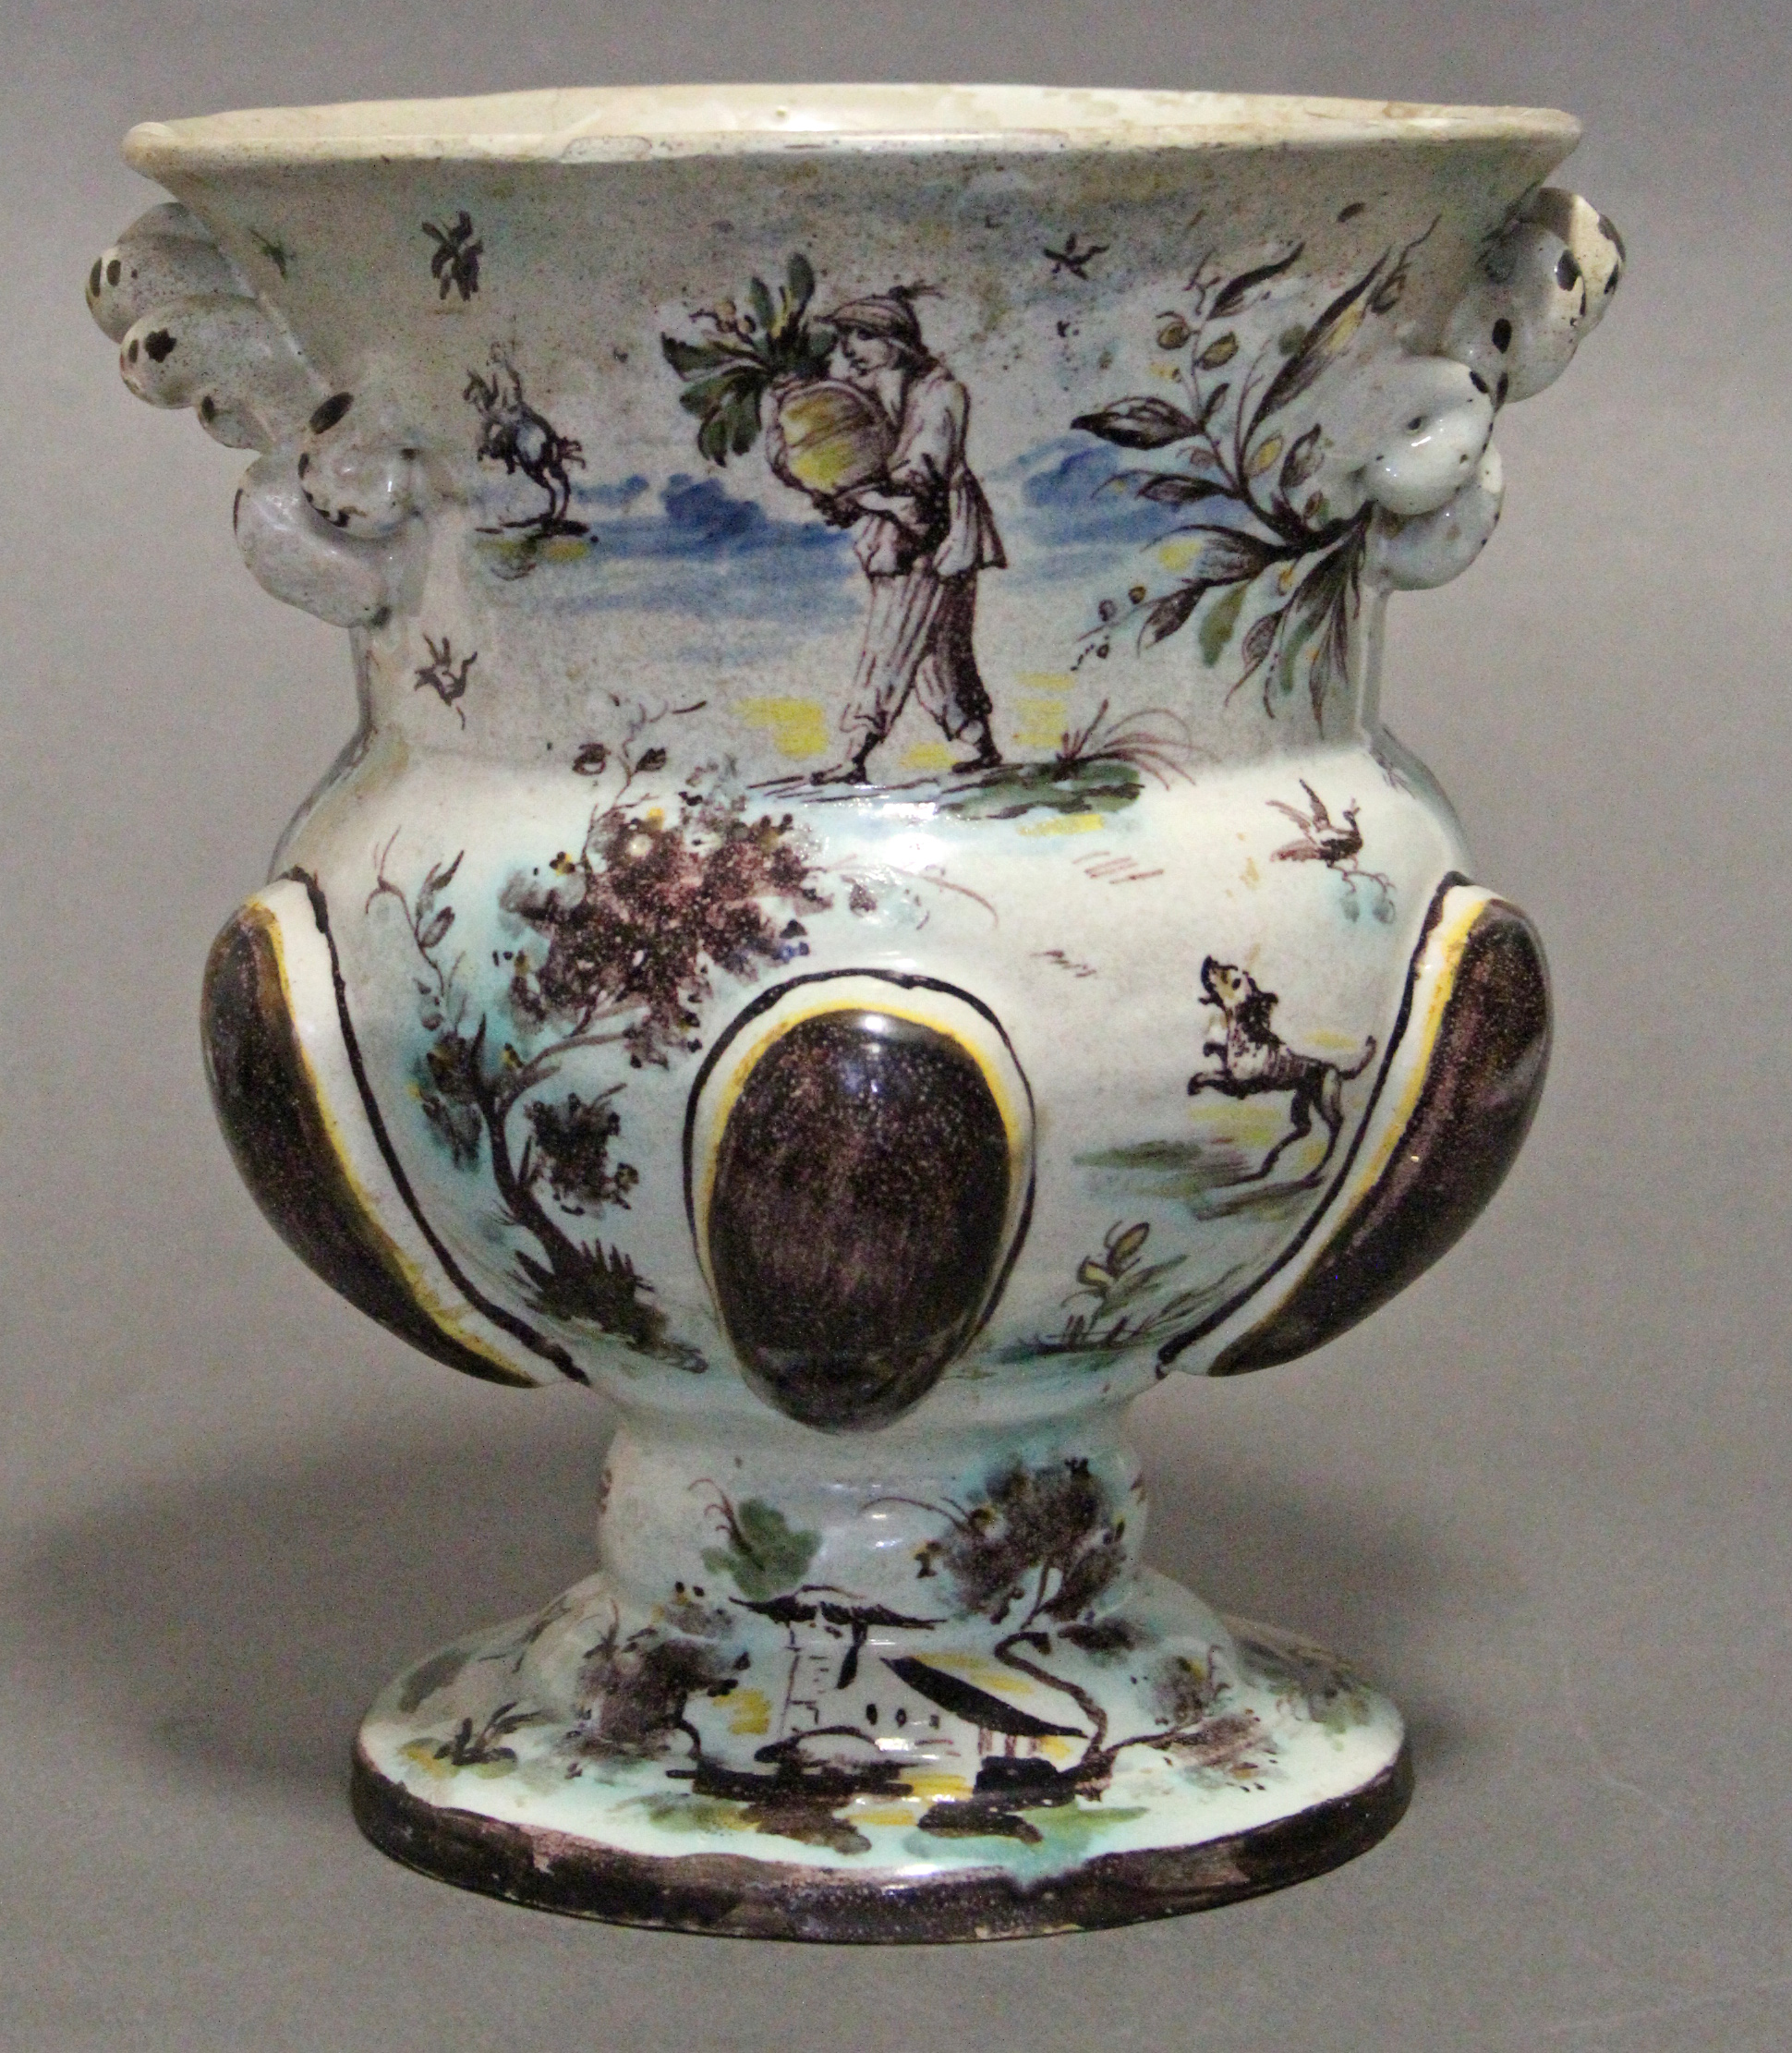 A 17th/18th century continental faience urn-shaped vase with polychrome decoration of figure scenes,